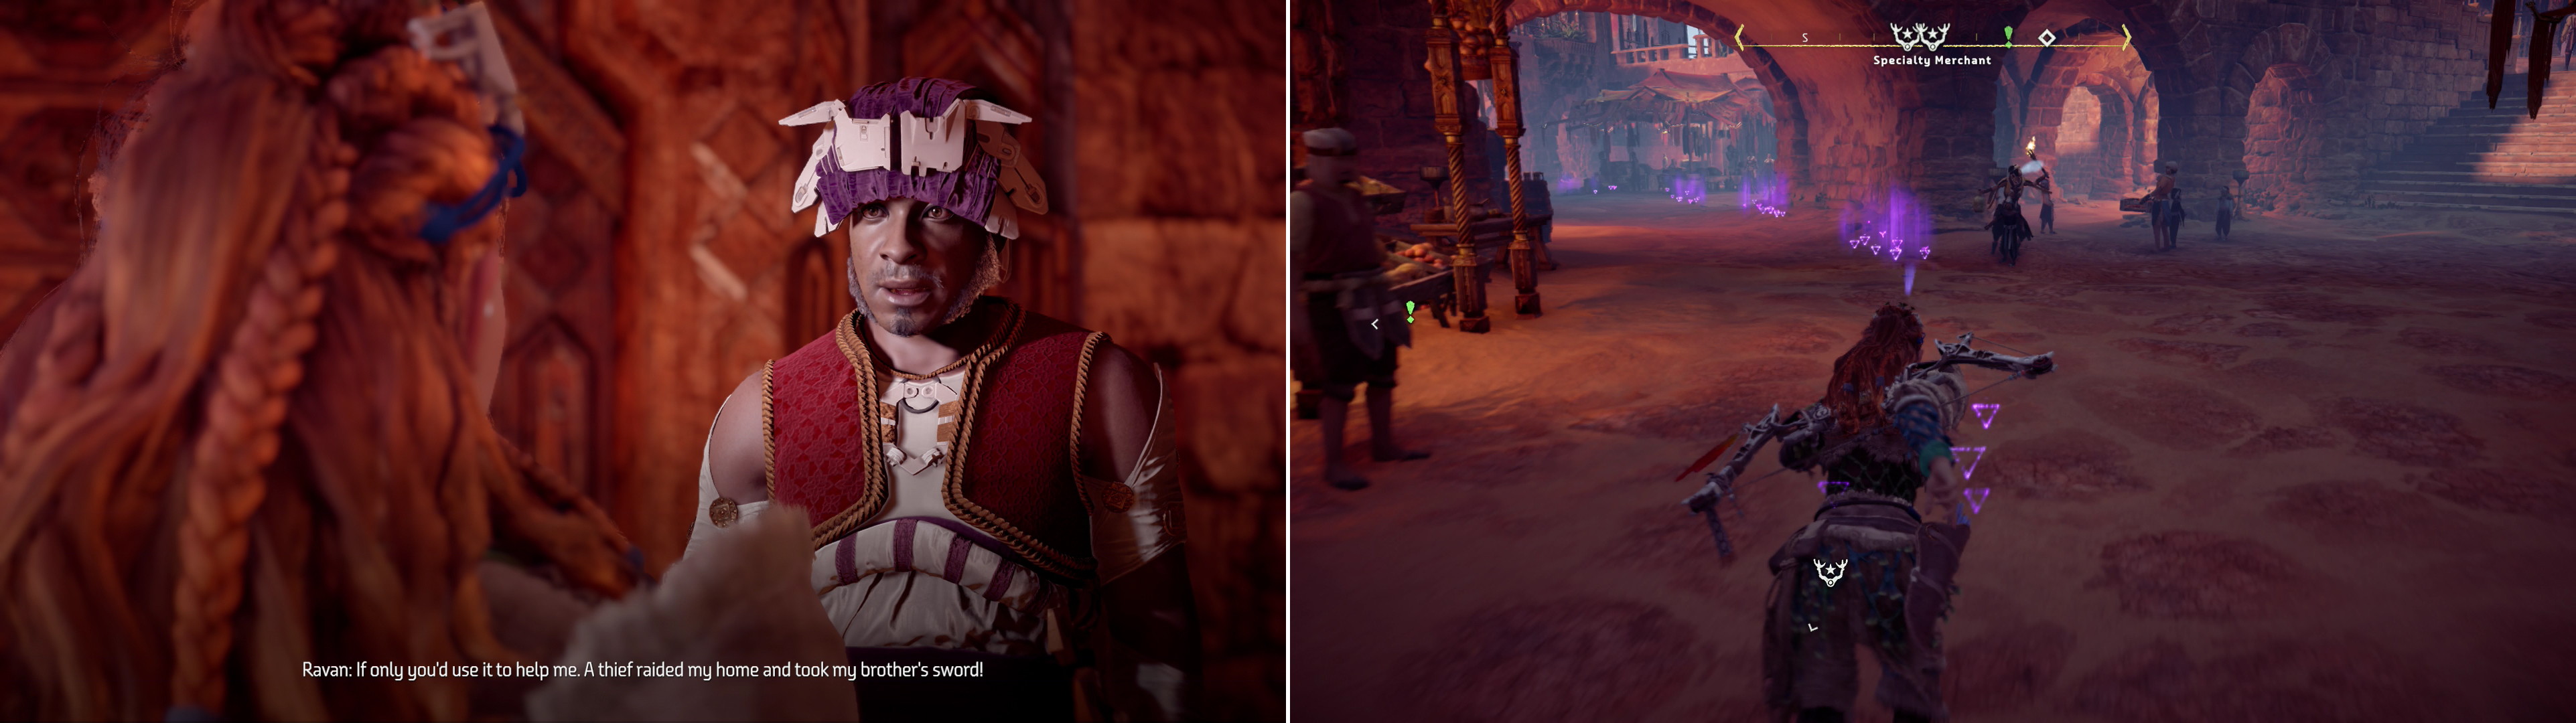 Talk to Ravan to learn about his plight (left) then track down the thief, who generously left a blood trail (right).